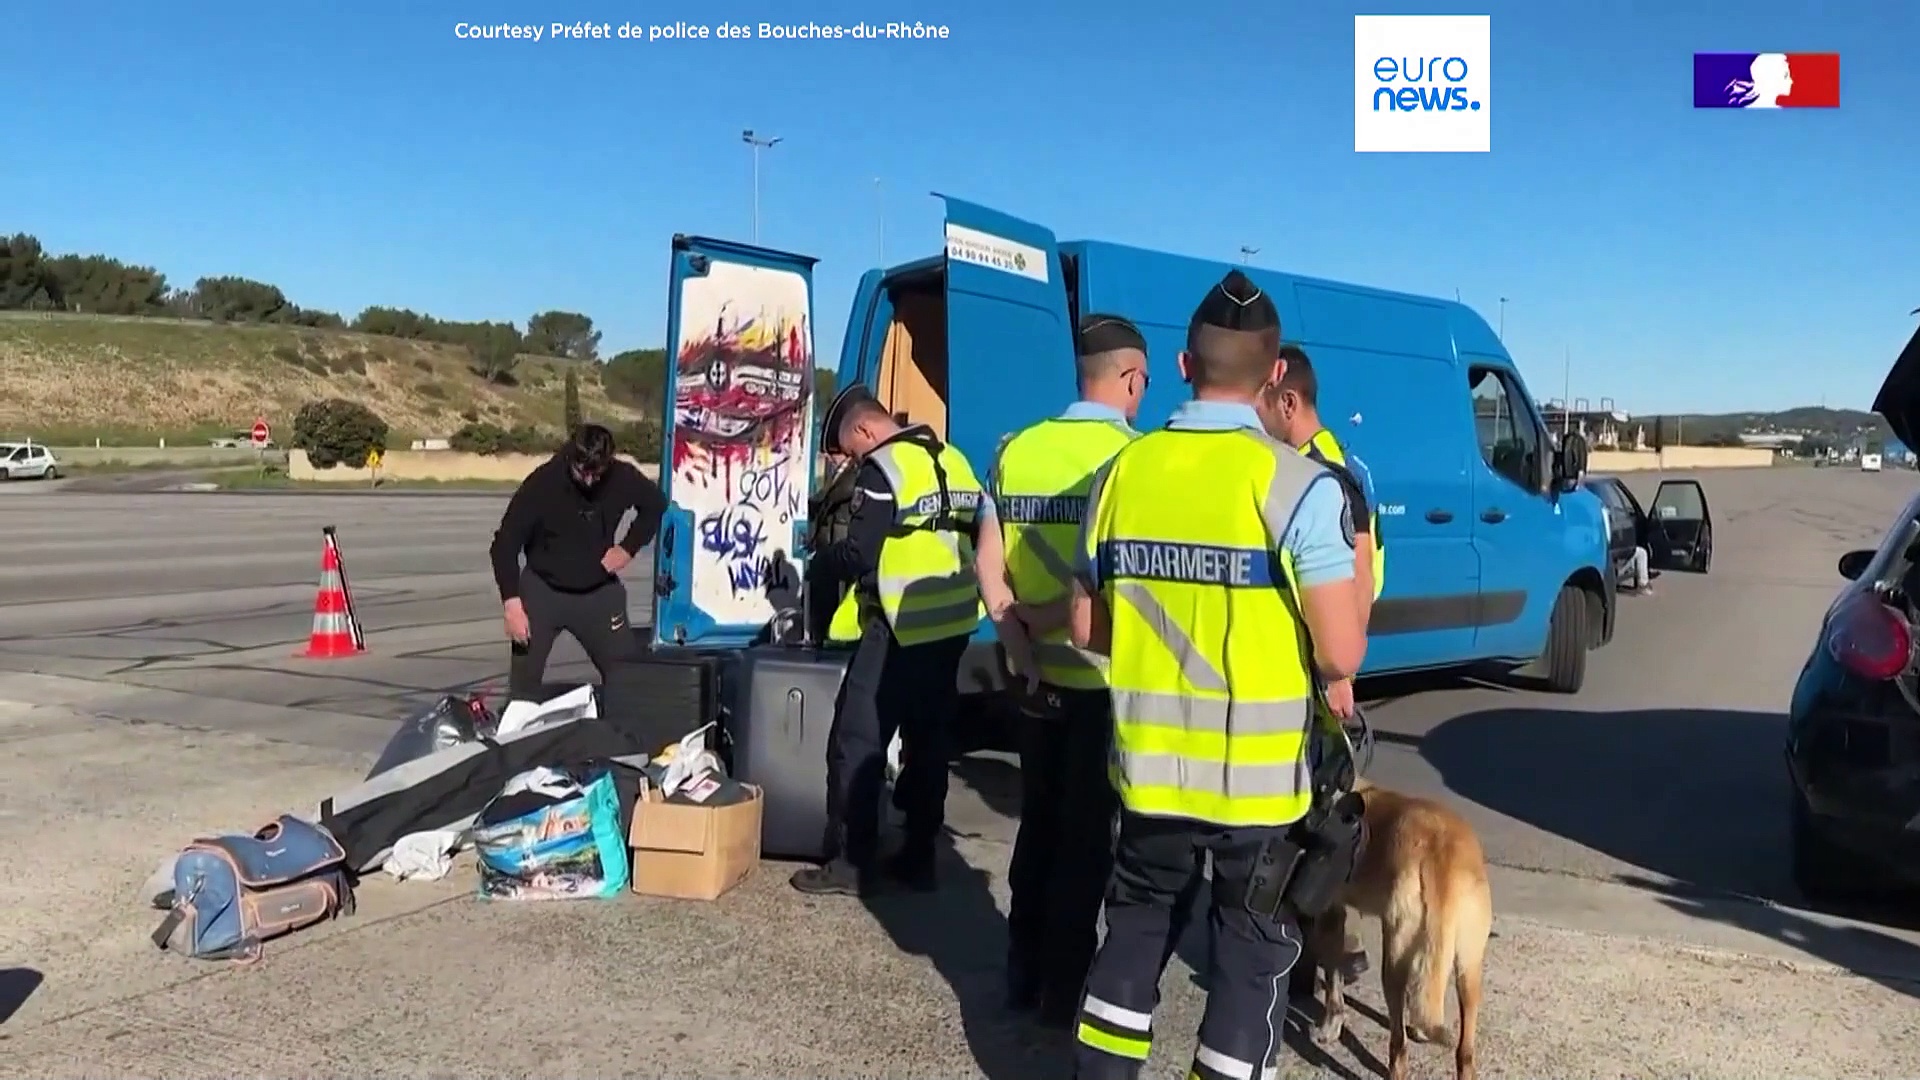 Hundreds arrested in ‘XXL cleanup’ French anti-drug operation